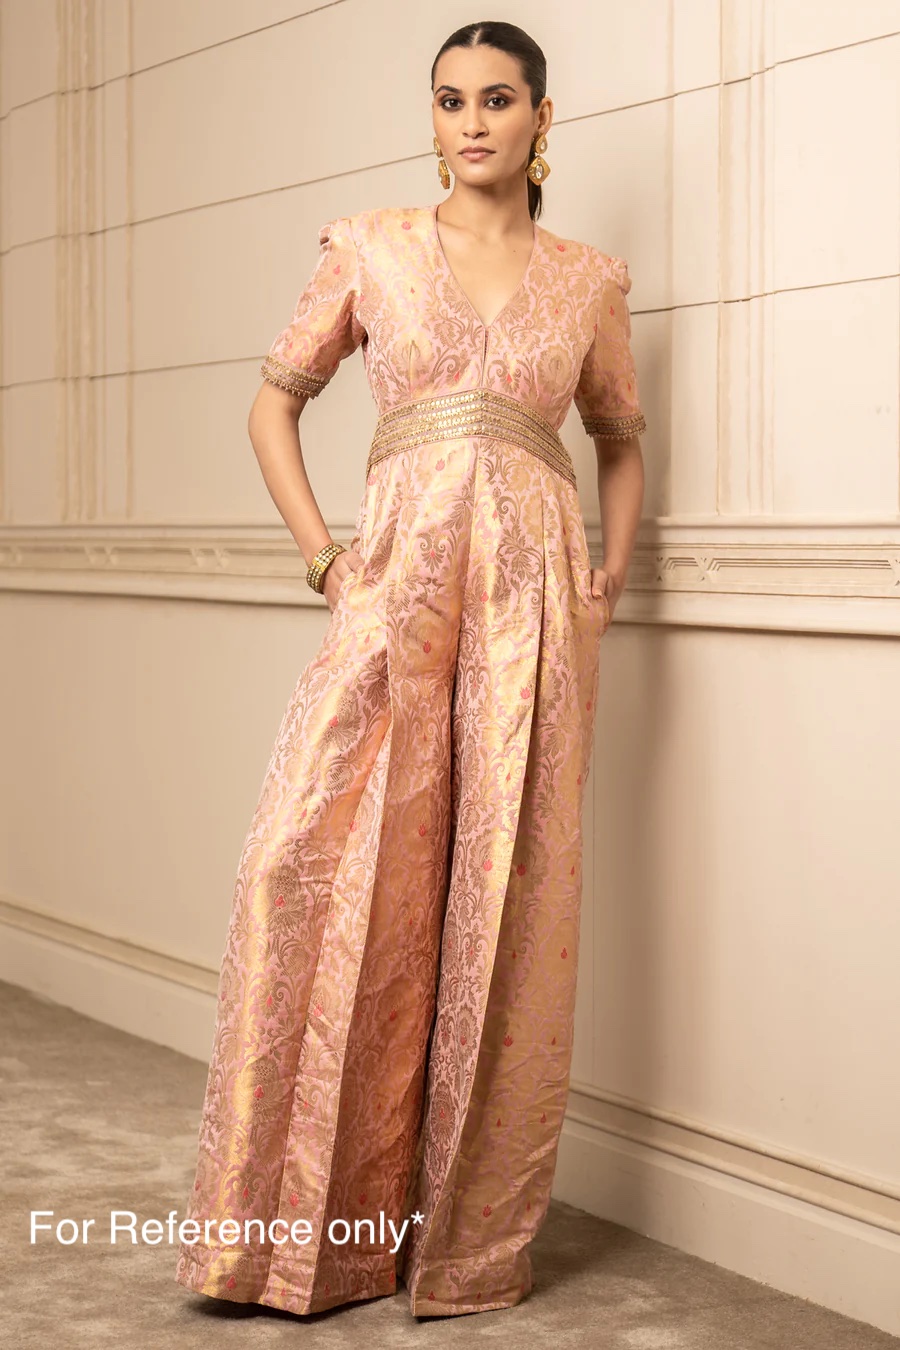 Brocade Jumpsuit with Gold Embroidery